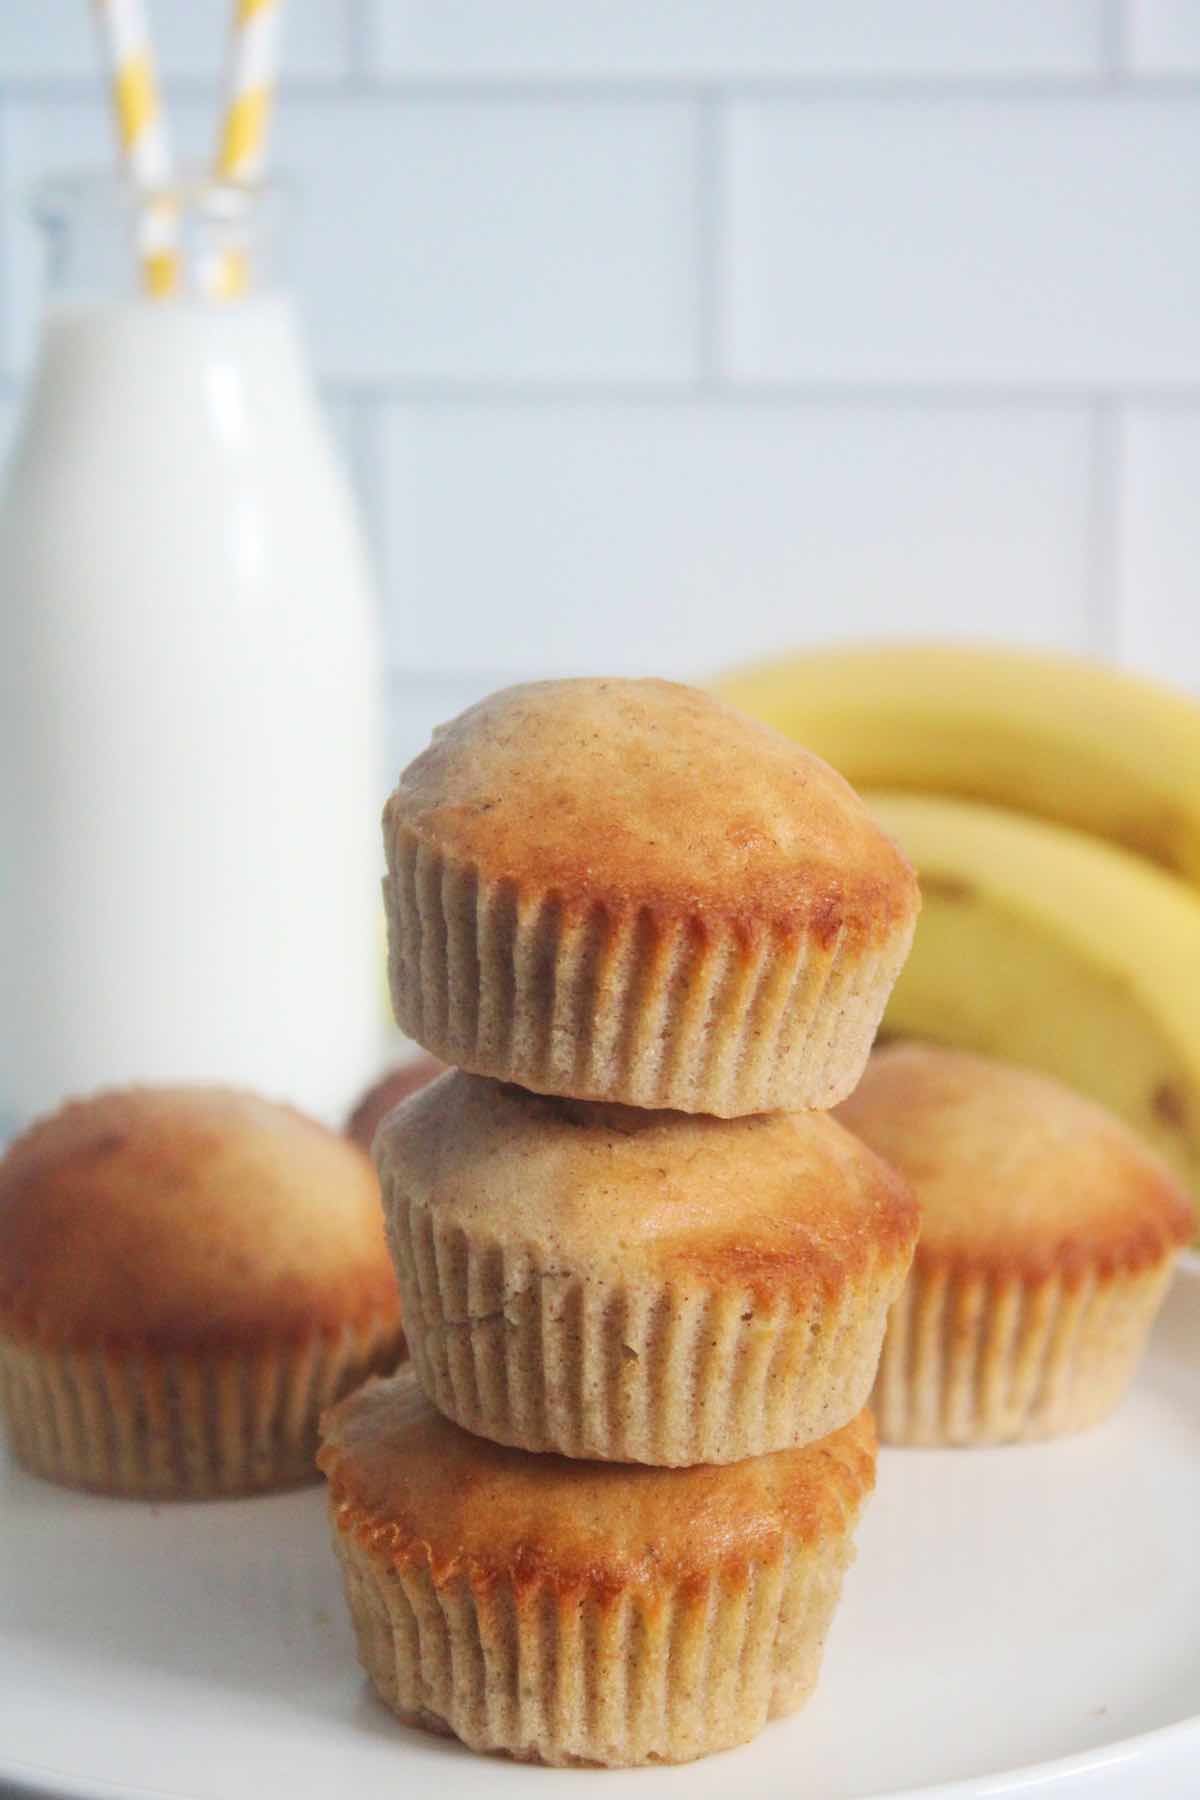 These air fryer banana muffins make the perfect breakfast.